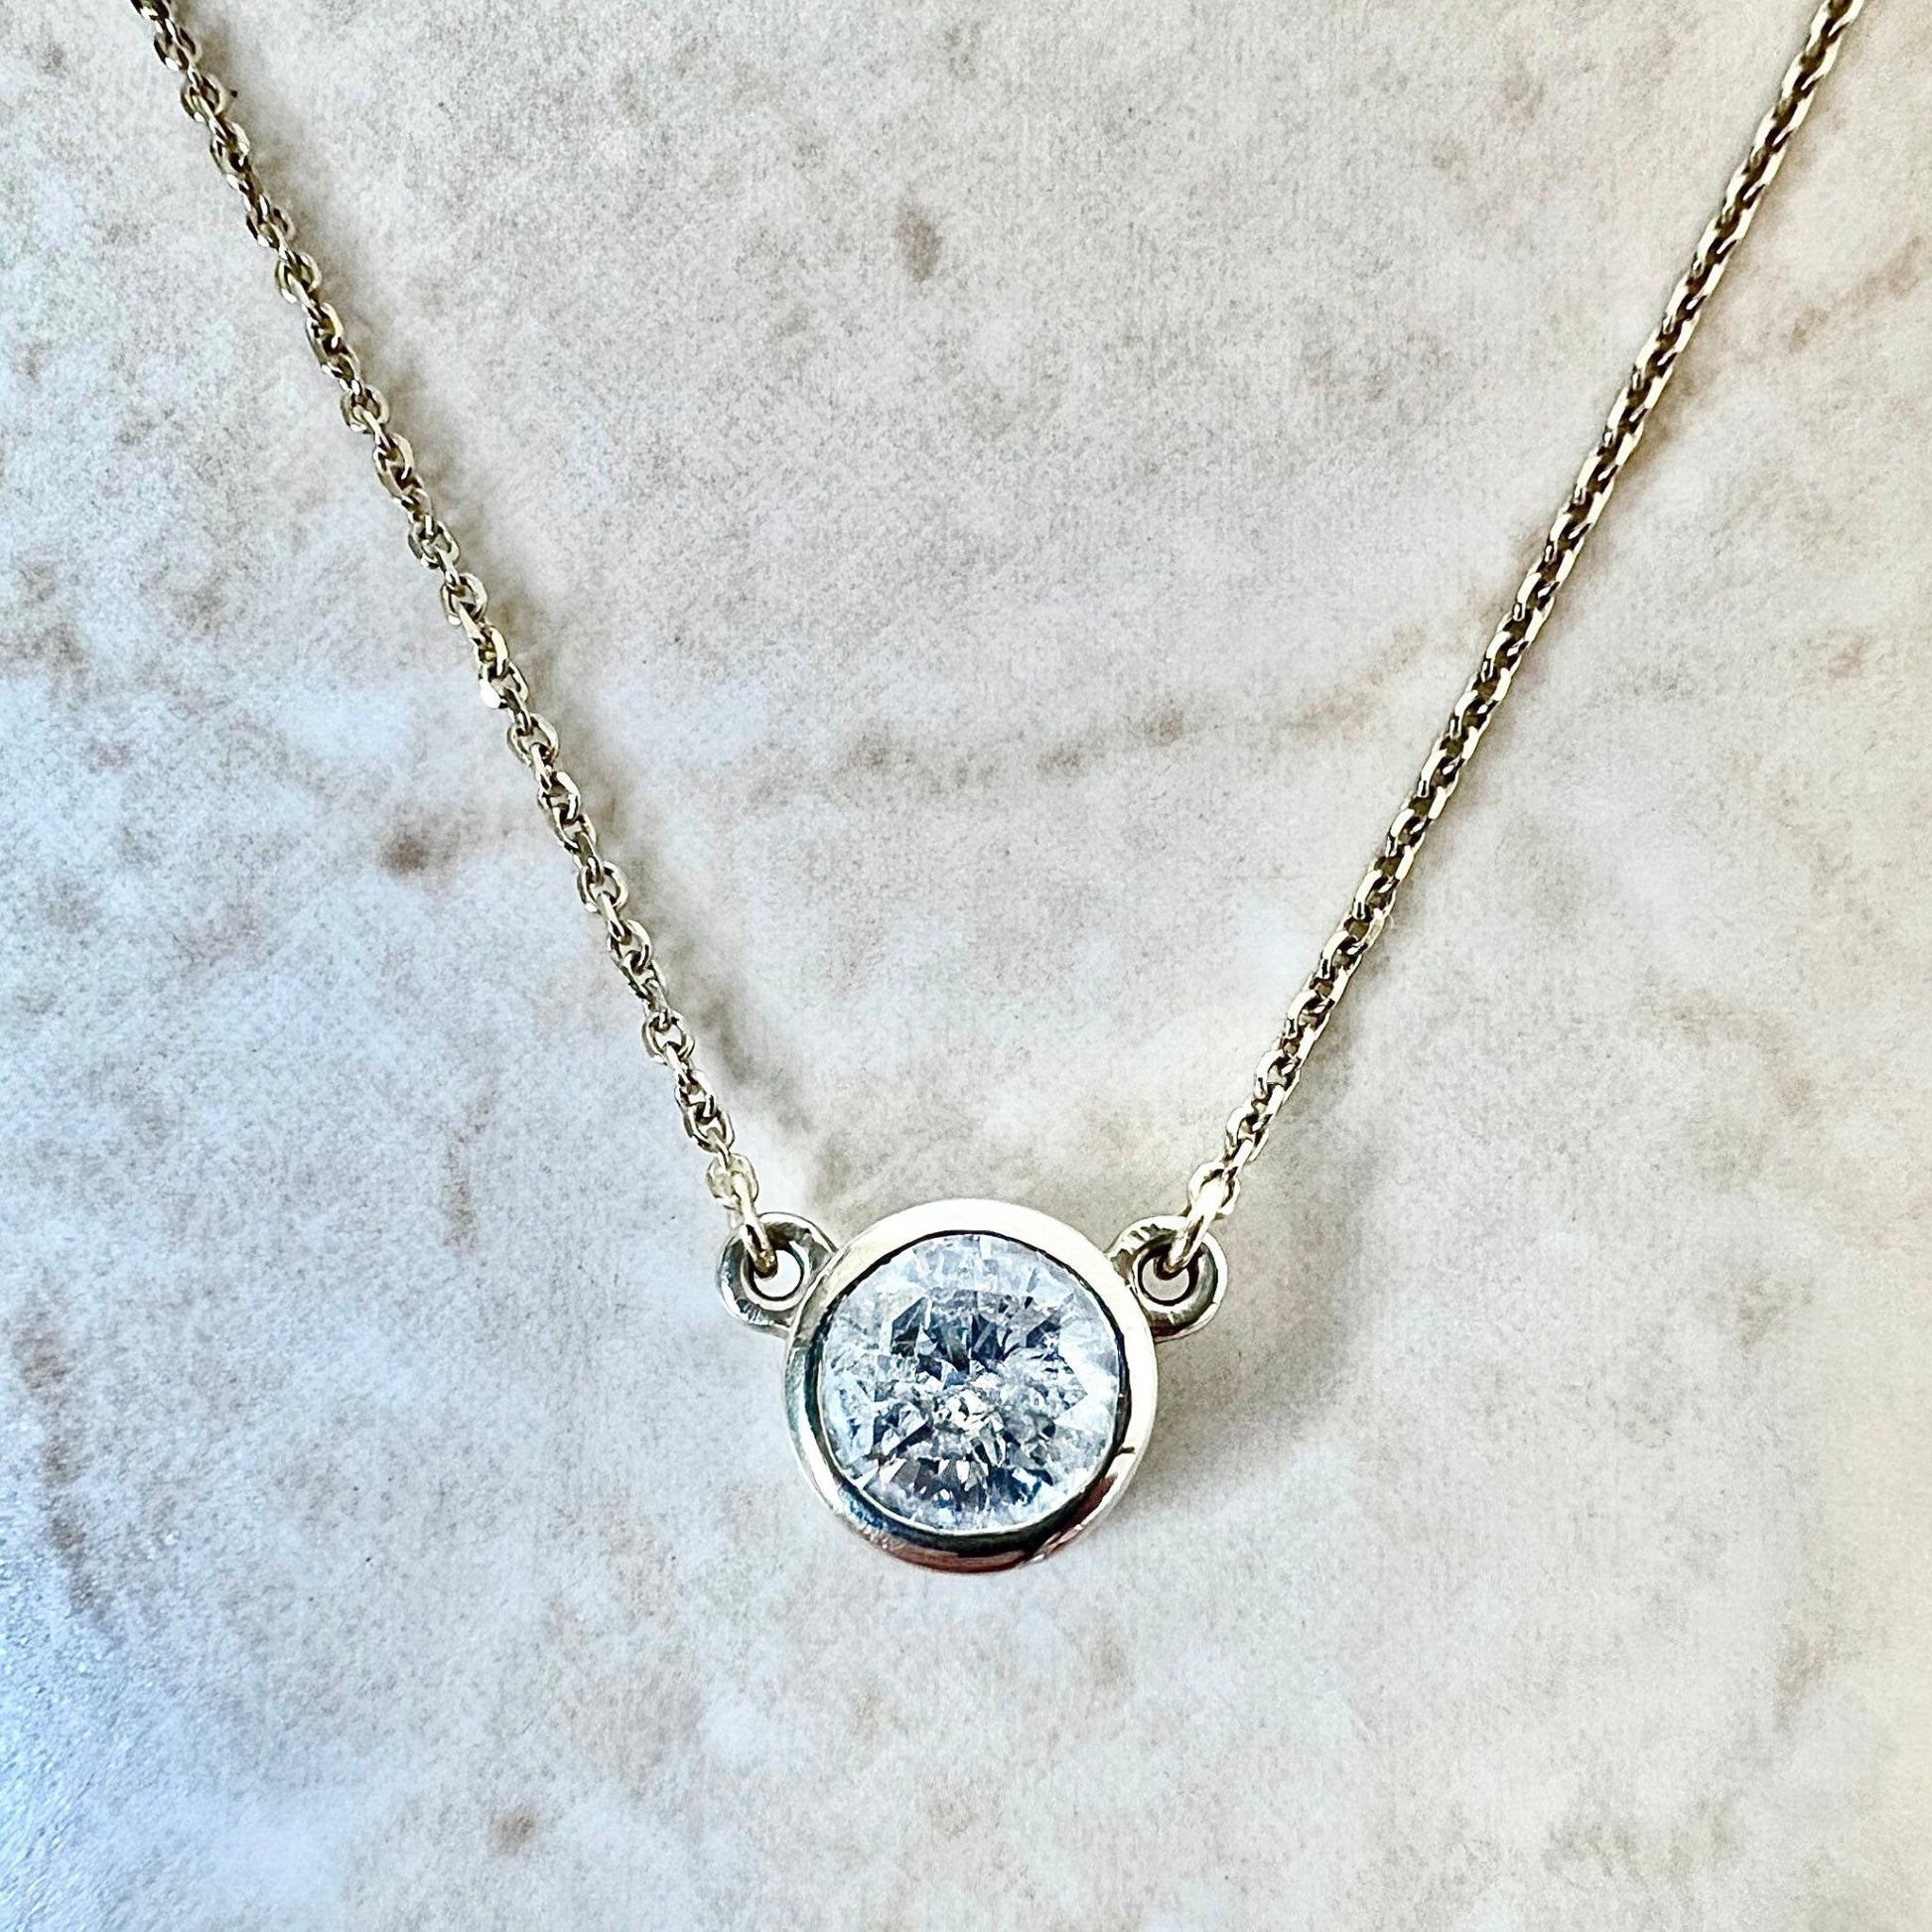 0.75 CT 14K Diamond Solitaire Necklace - Two Tone Gold Diamond Bezel Necklace -Diamond Necklace-Solitaire Pendant Necklace-Best Gift For Her